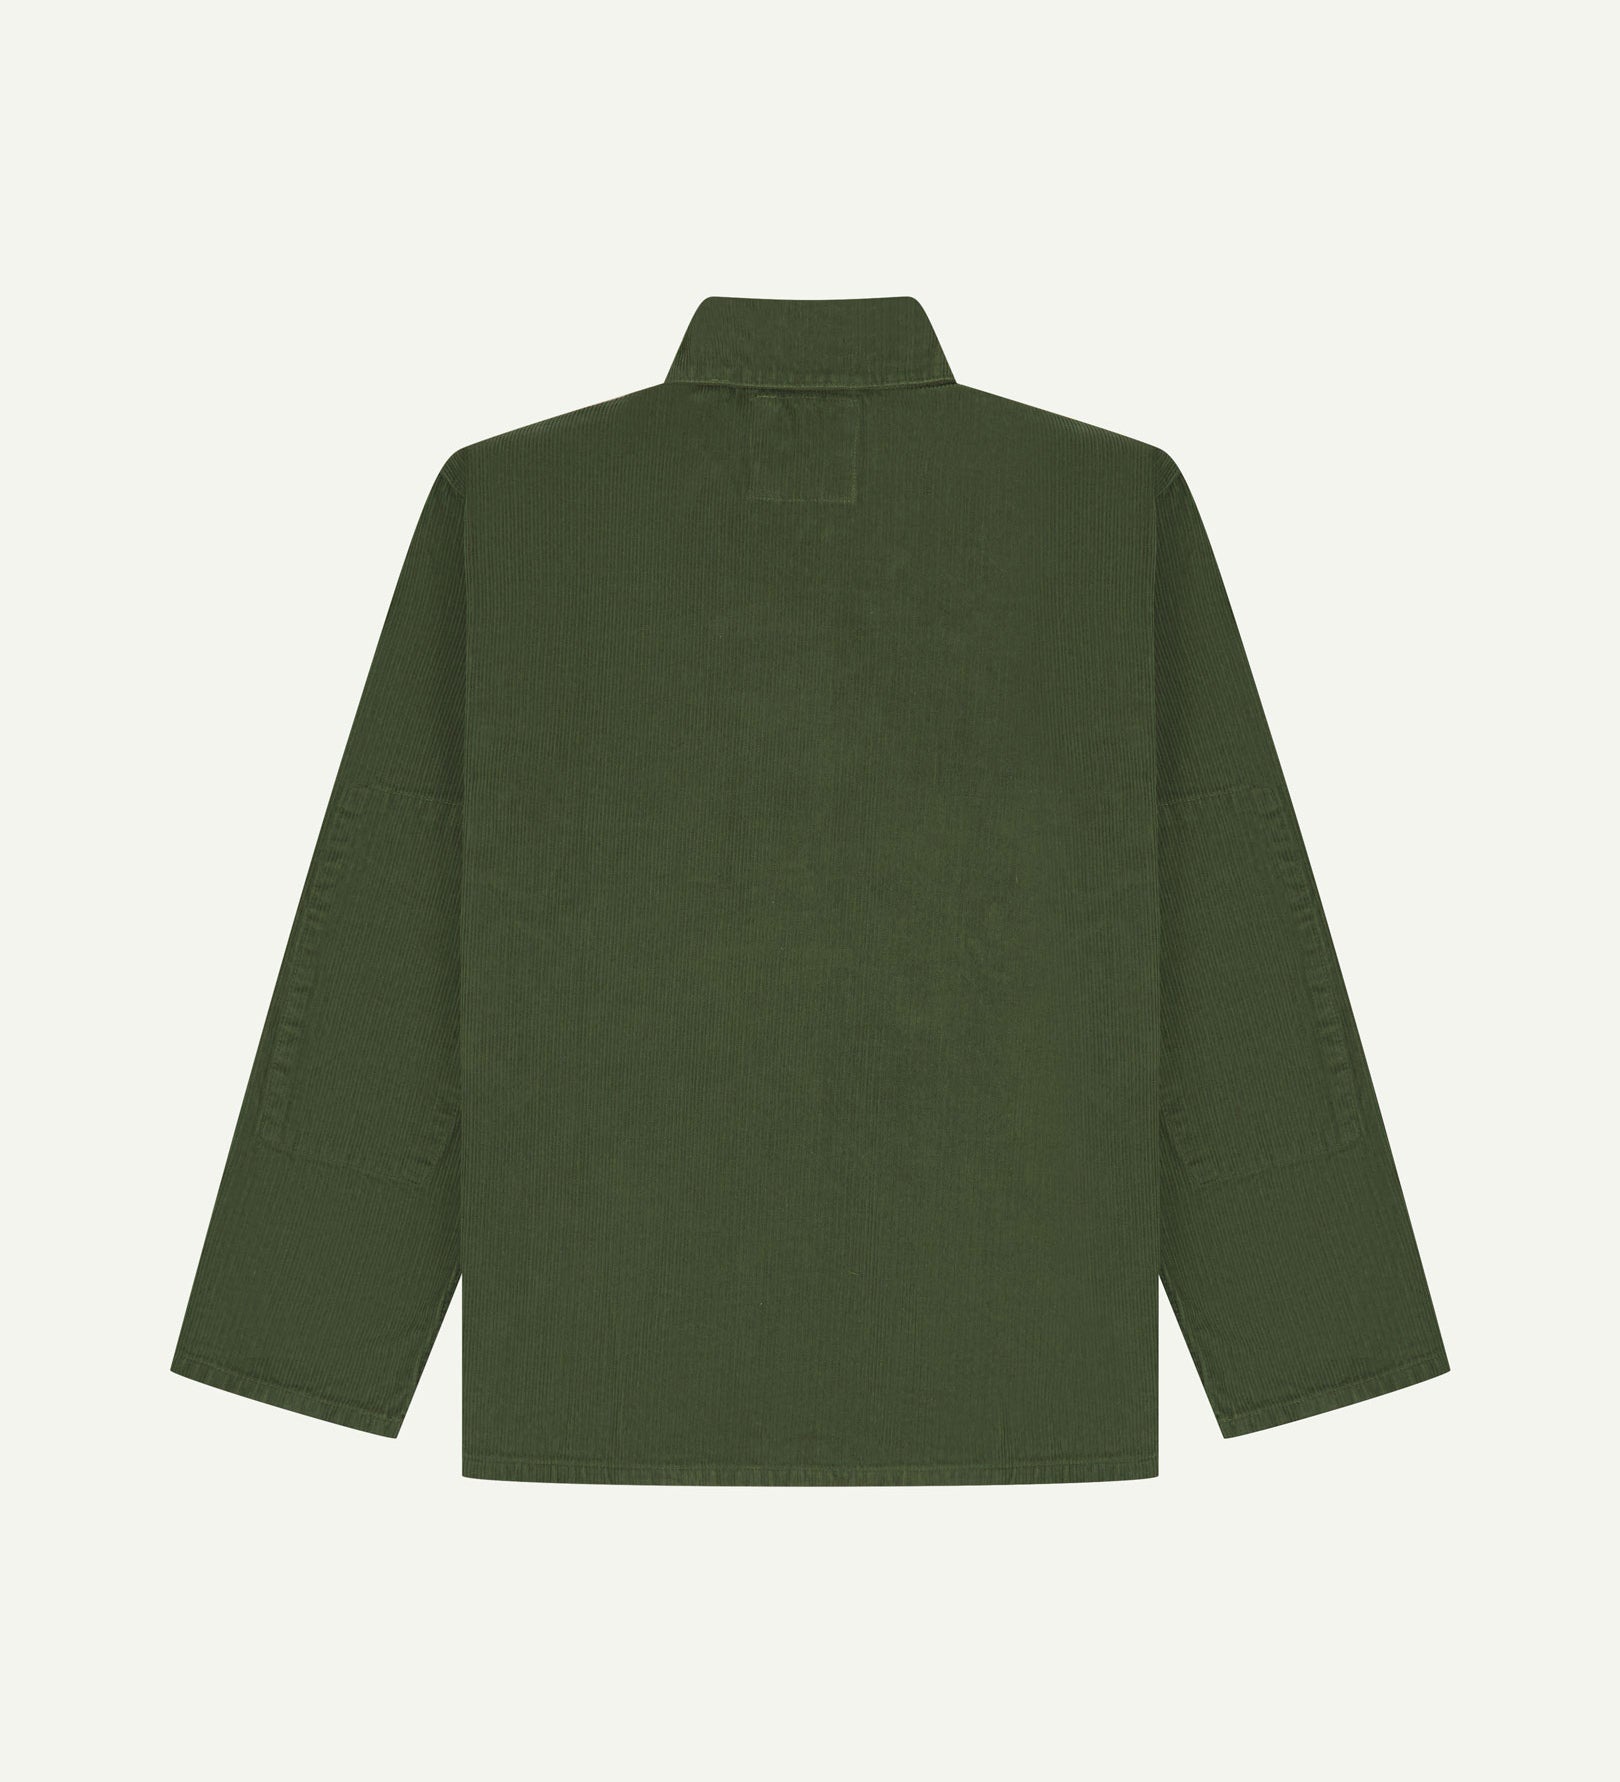 Back view of coriander-green, buttoned corduroy overshirt with view of reinforced elbow area and boxy silhouette.